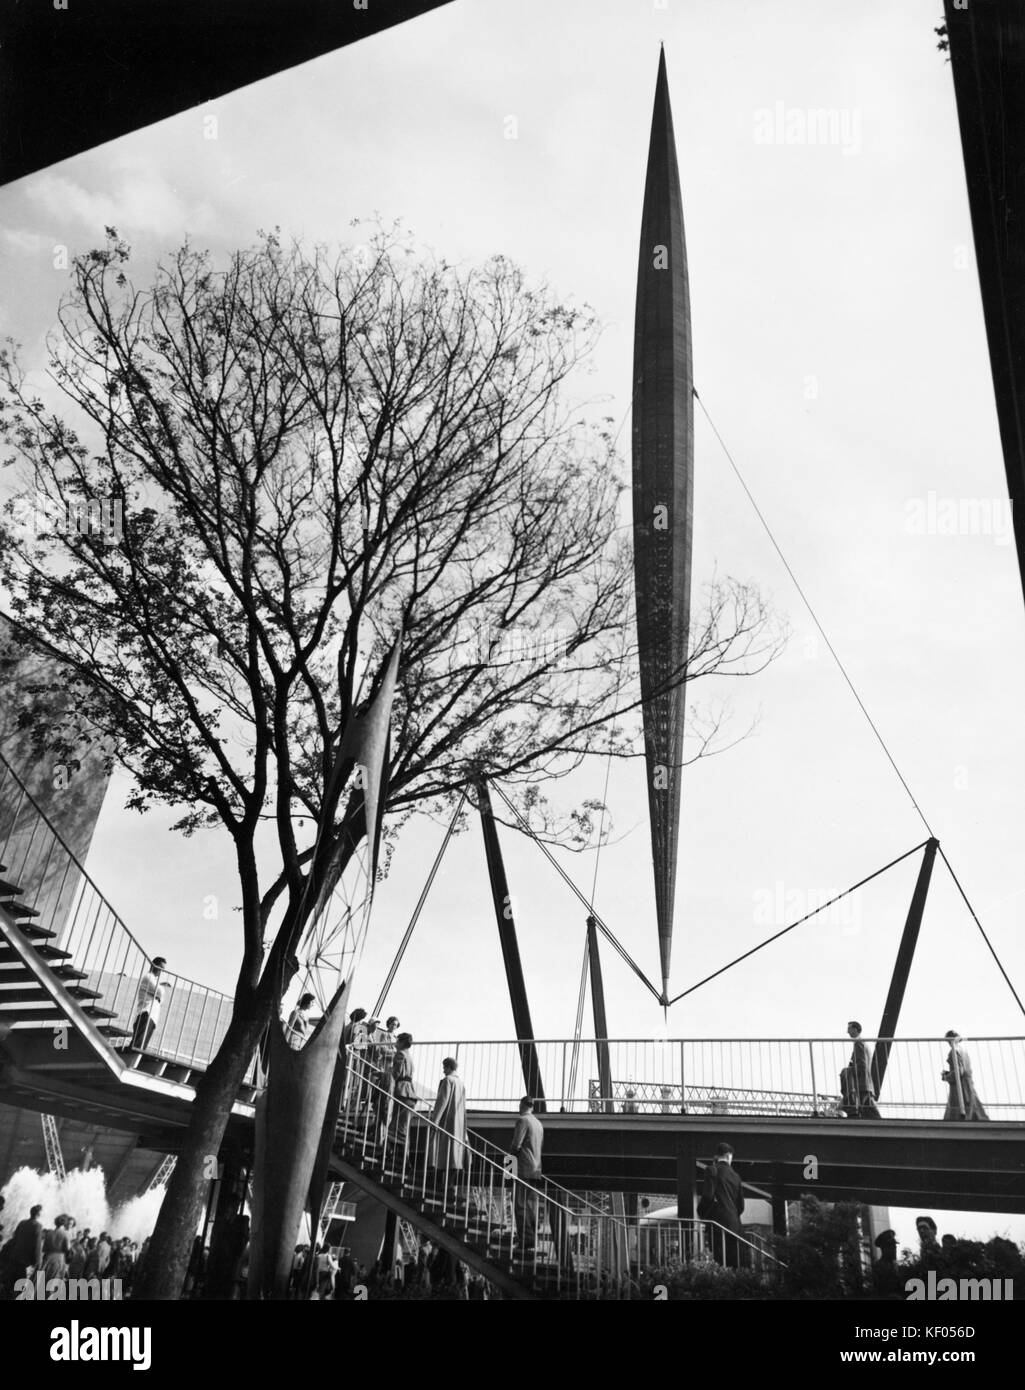 Festival of Britain, South Bank, Lambeth, London. The 'Skylon' at the Fesitval of Britain on the South Bank. Photographed in 1951. Stock Photo